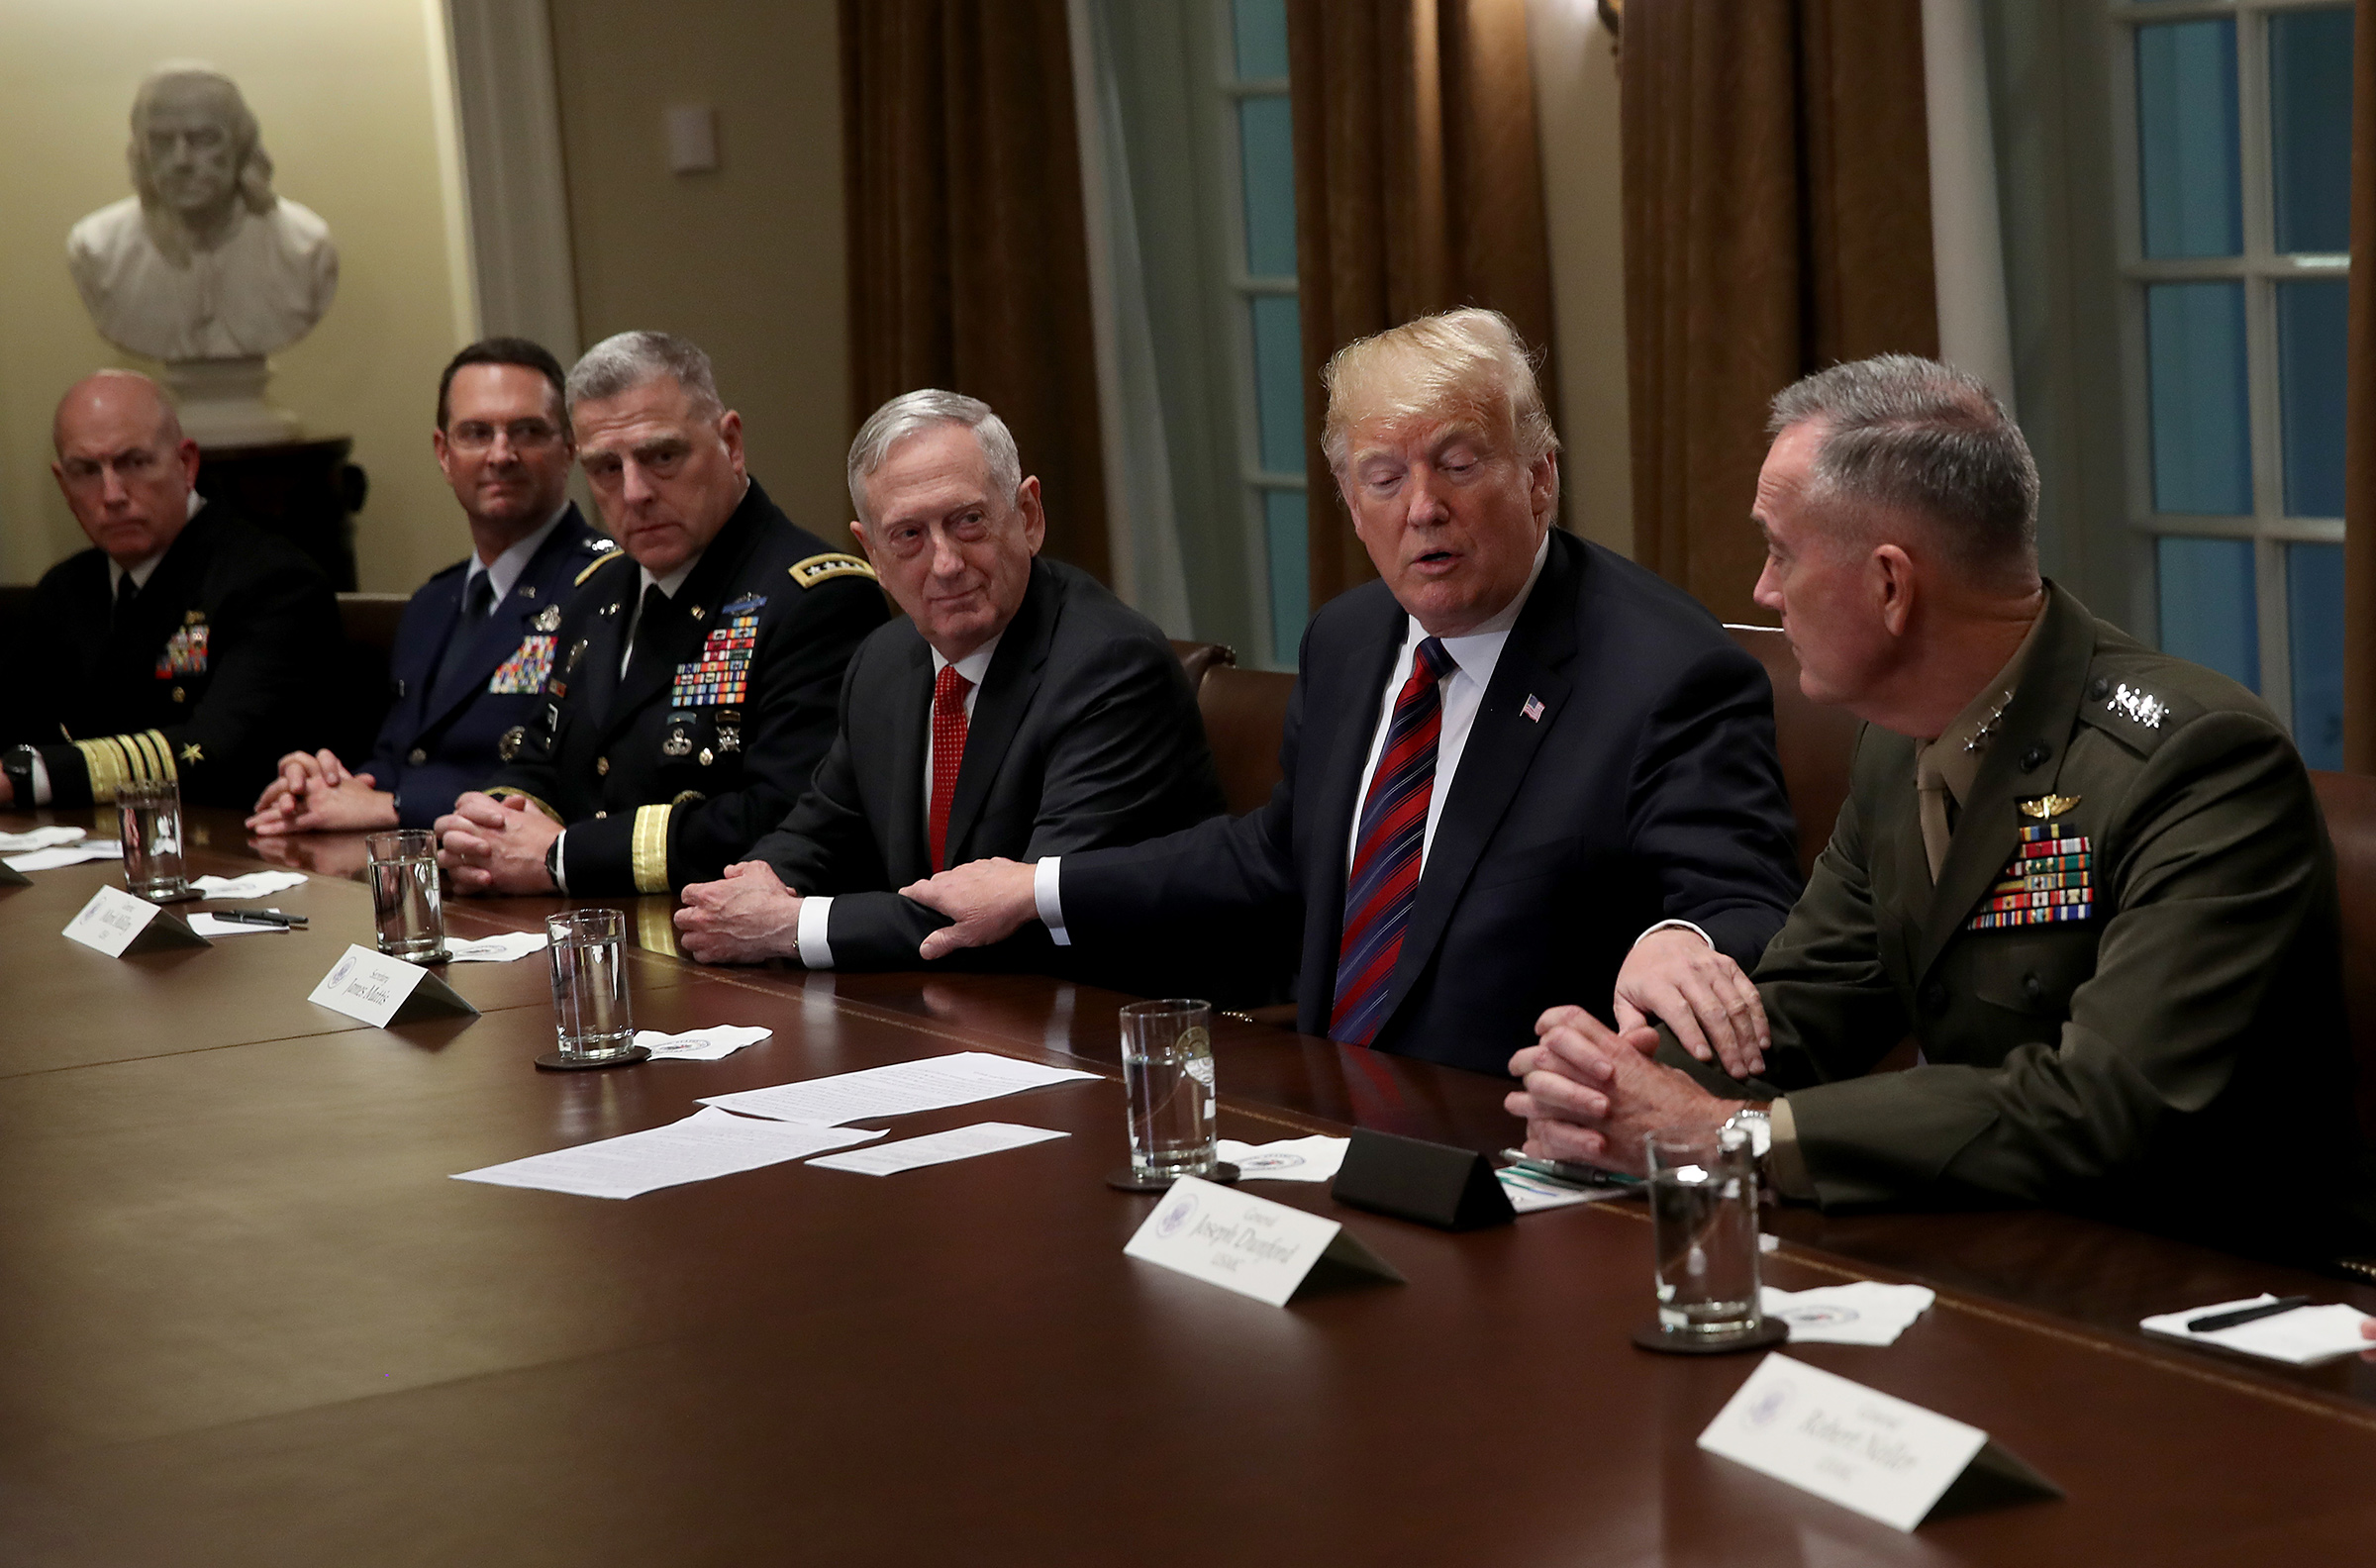 President Trump during a meeting with U.S. military leaders in 2018 (Win McNamee—Getty Images)